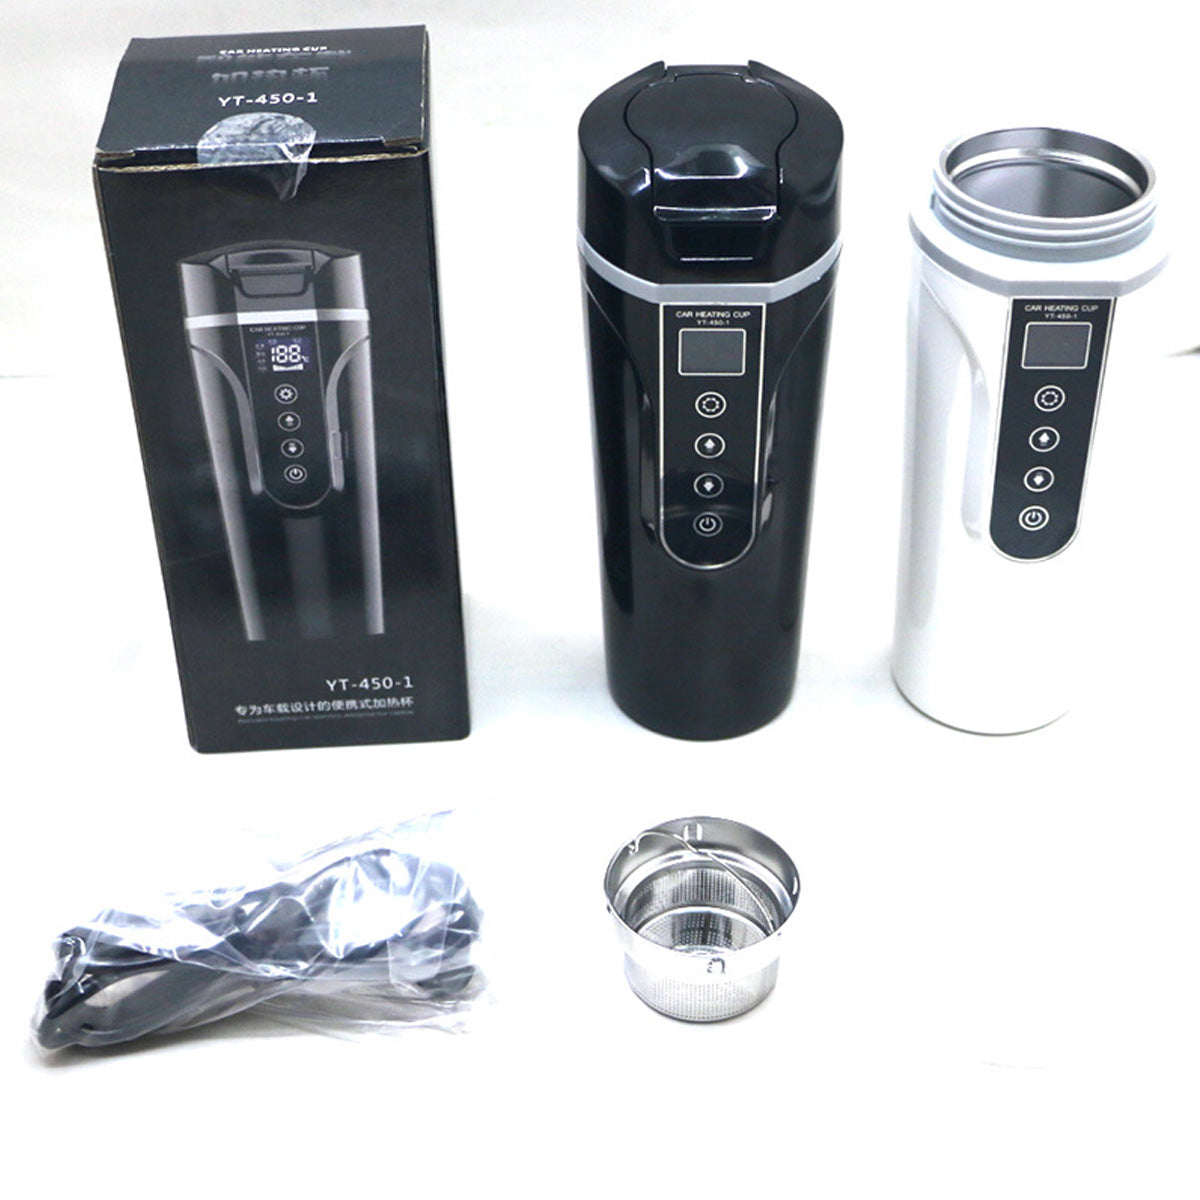 450ml 12V / 24V Car Heating Cup Stainless Steel Electric Water Cup LCD Display Temperature - Auto GoShop